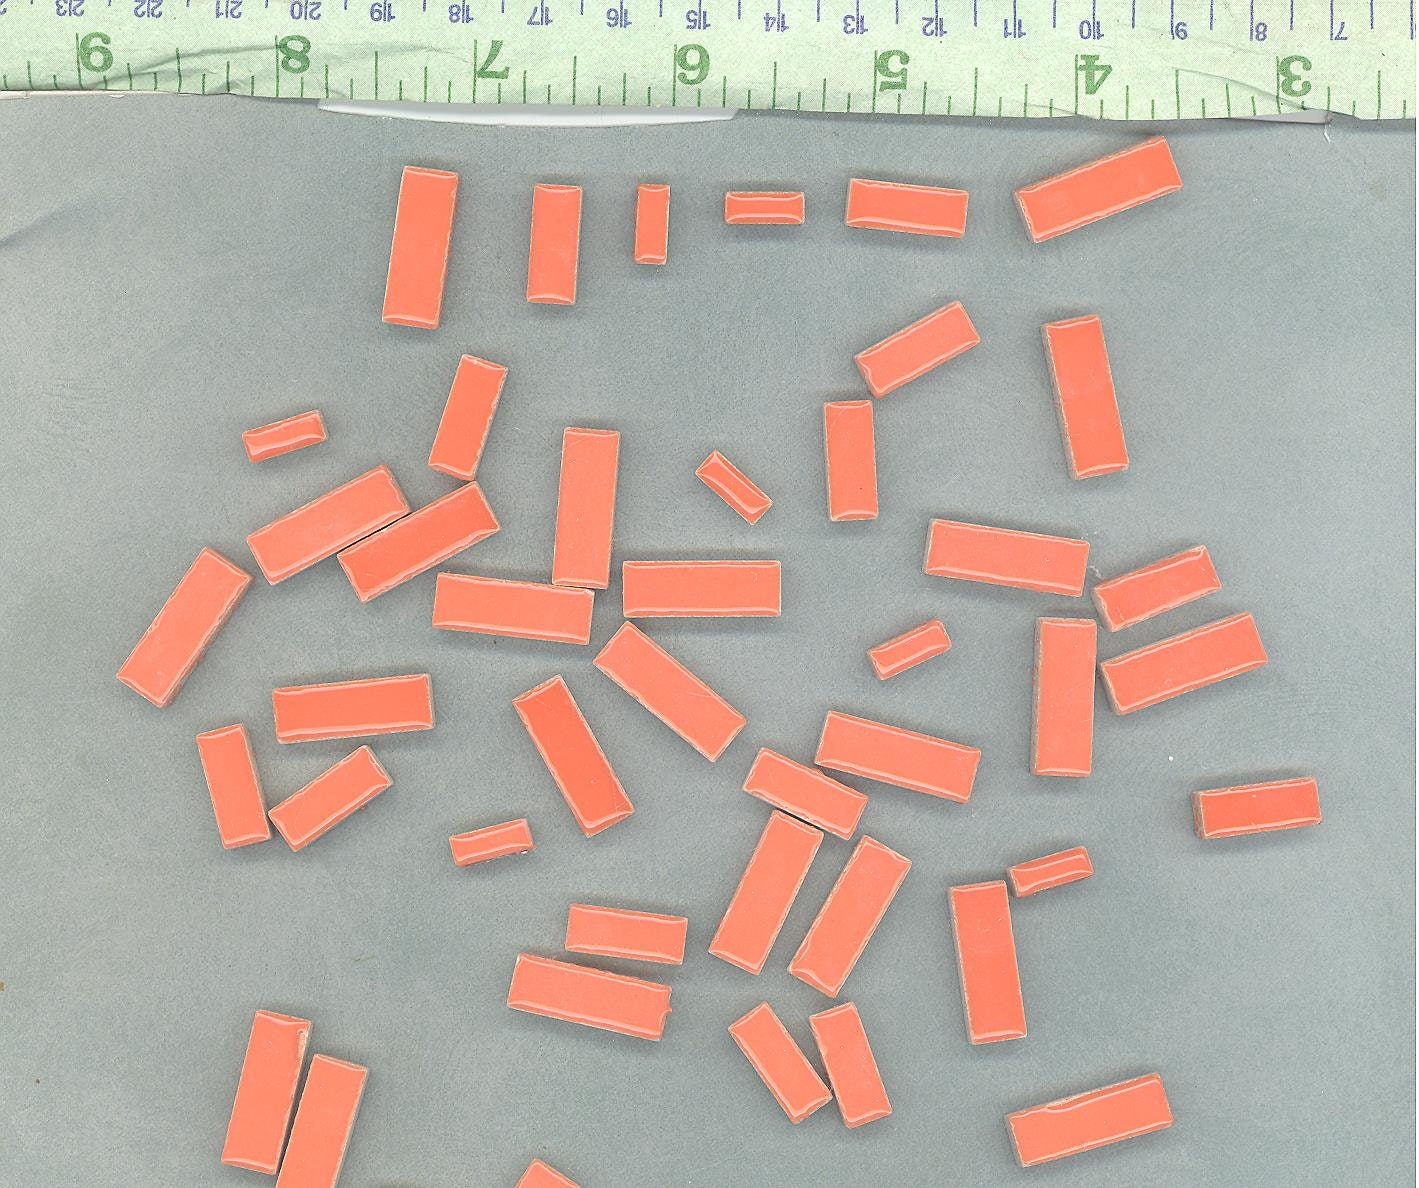 Orange Mini Rectangles Mosaic Tiles - 50g Ceramic in Mix of 3 Sizes 3/8" and 5/8" and 3/4"